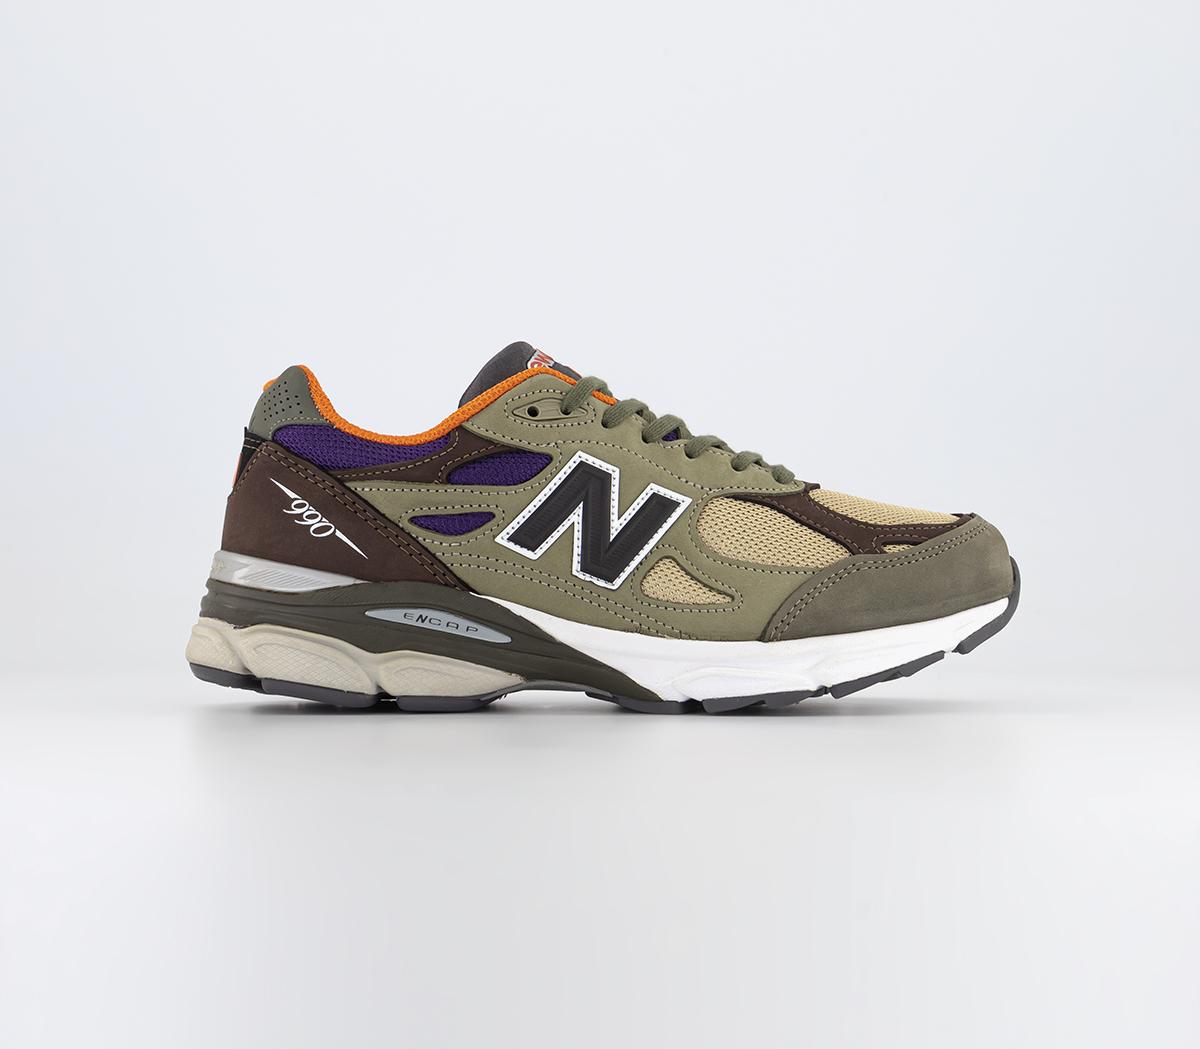 New Balance990v3 Made in USA TrainersBrown